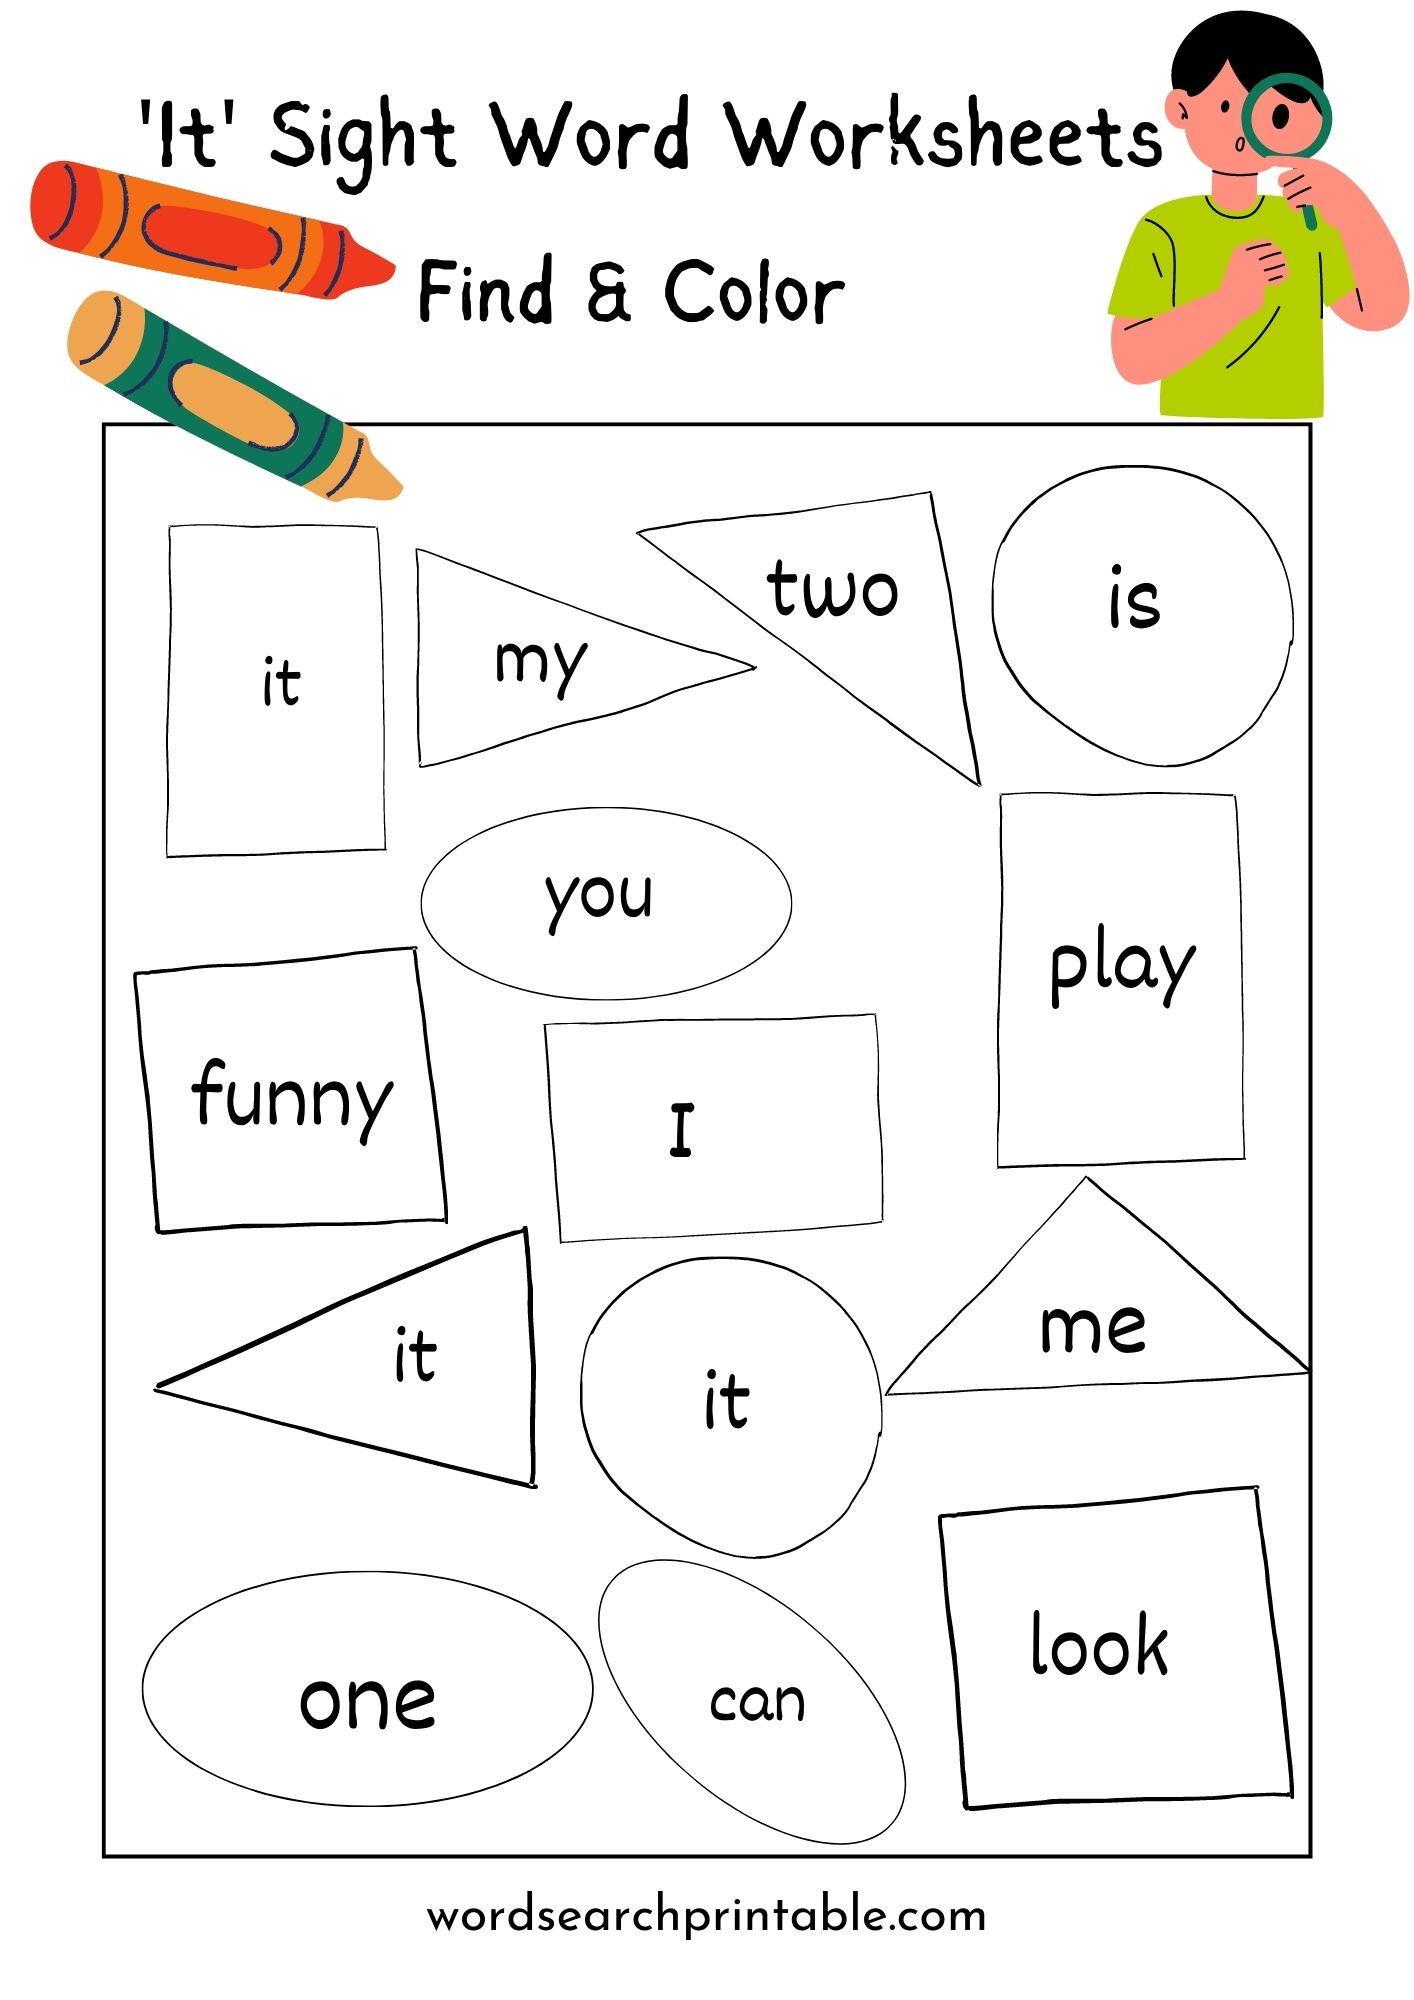 Find the sight word It and Color the geometric shape